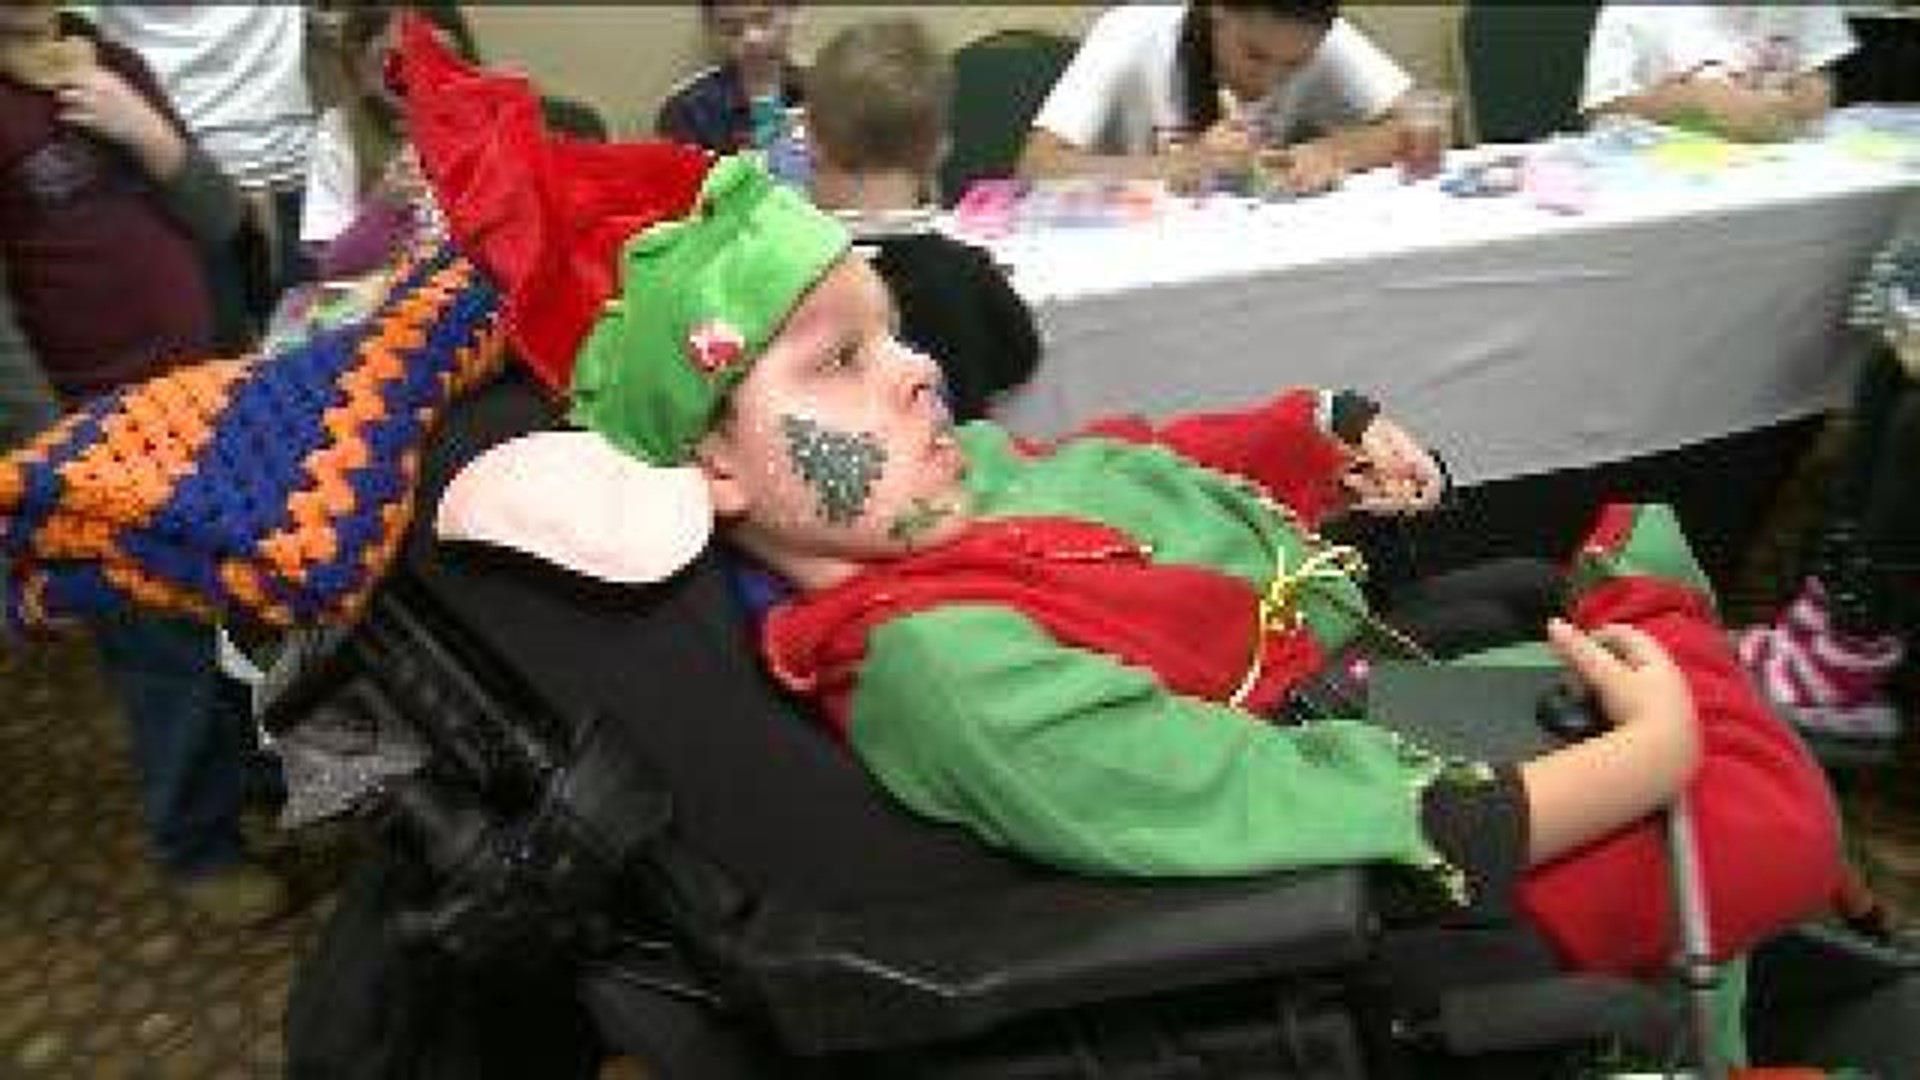 Boy Throws a Party for Kids with Disabilities